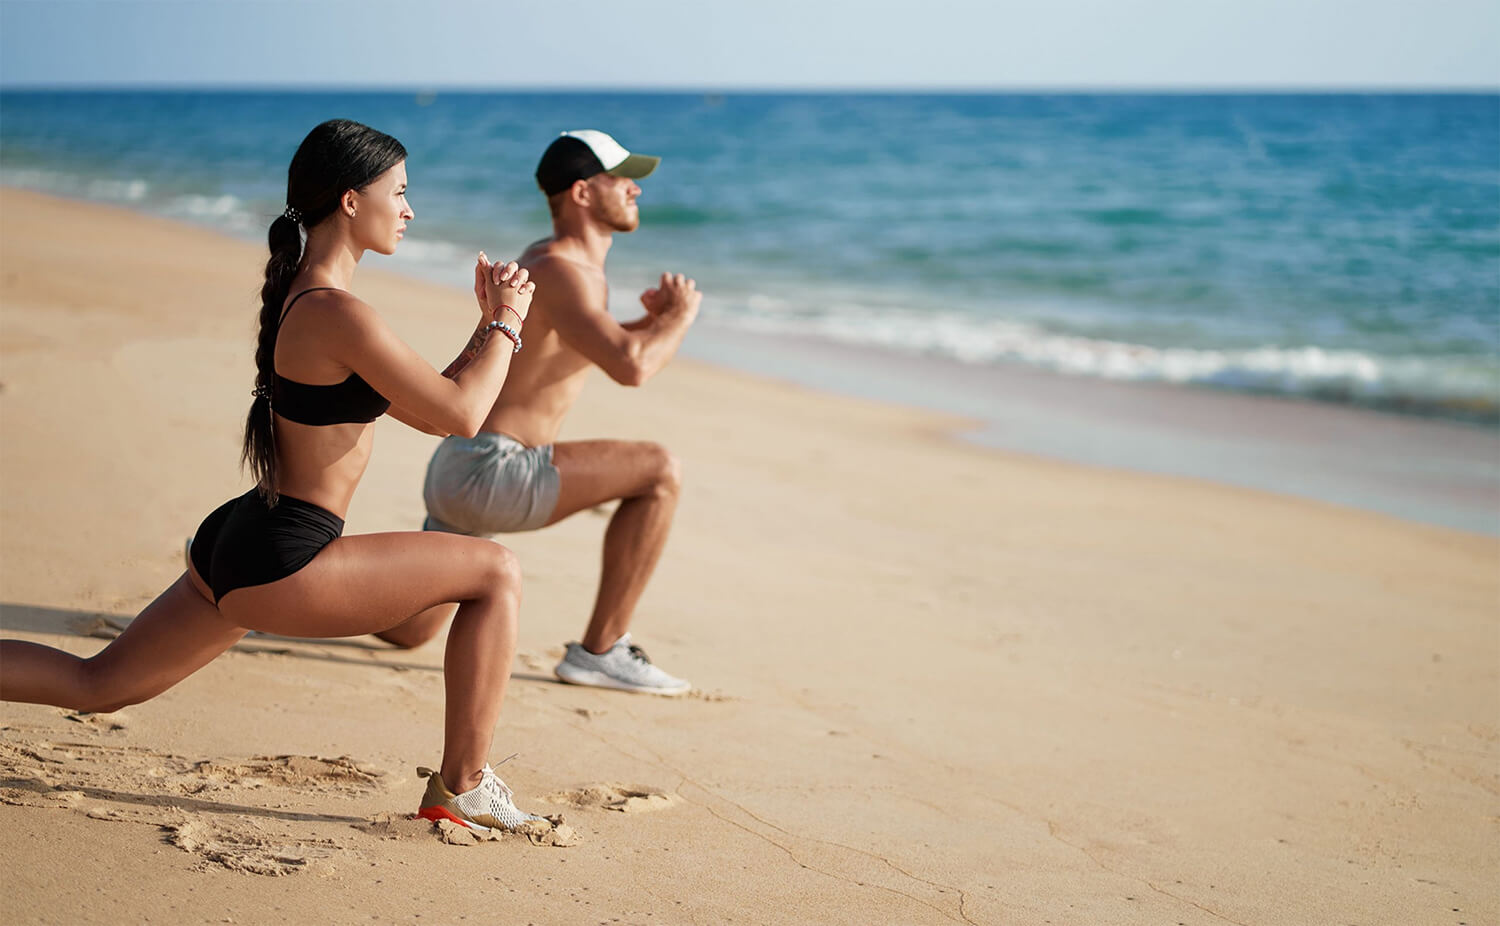 A man and woman are doing exercise, promoting Thrive Medspa in Basking Ridge, NJ.